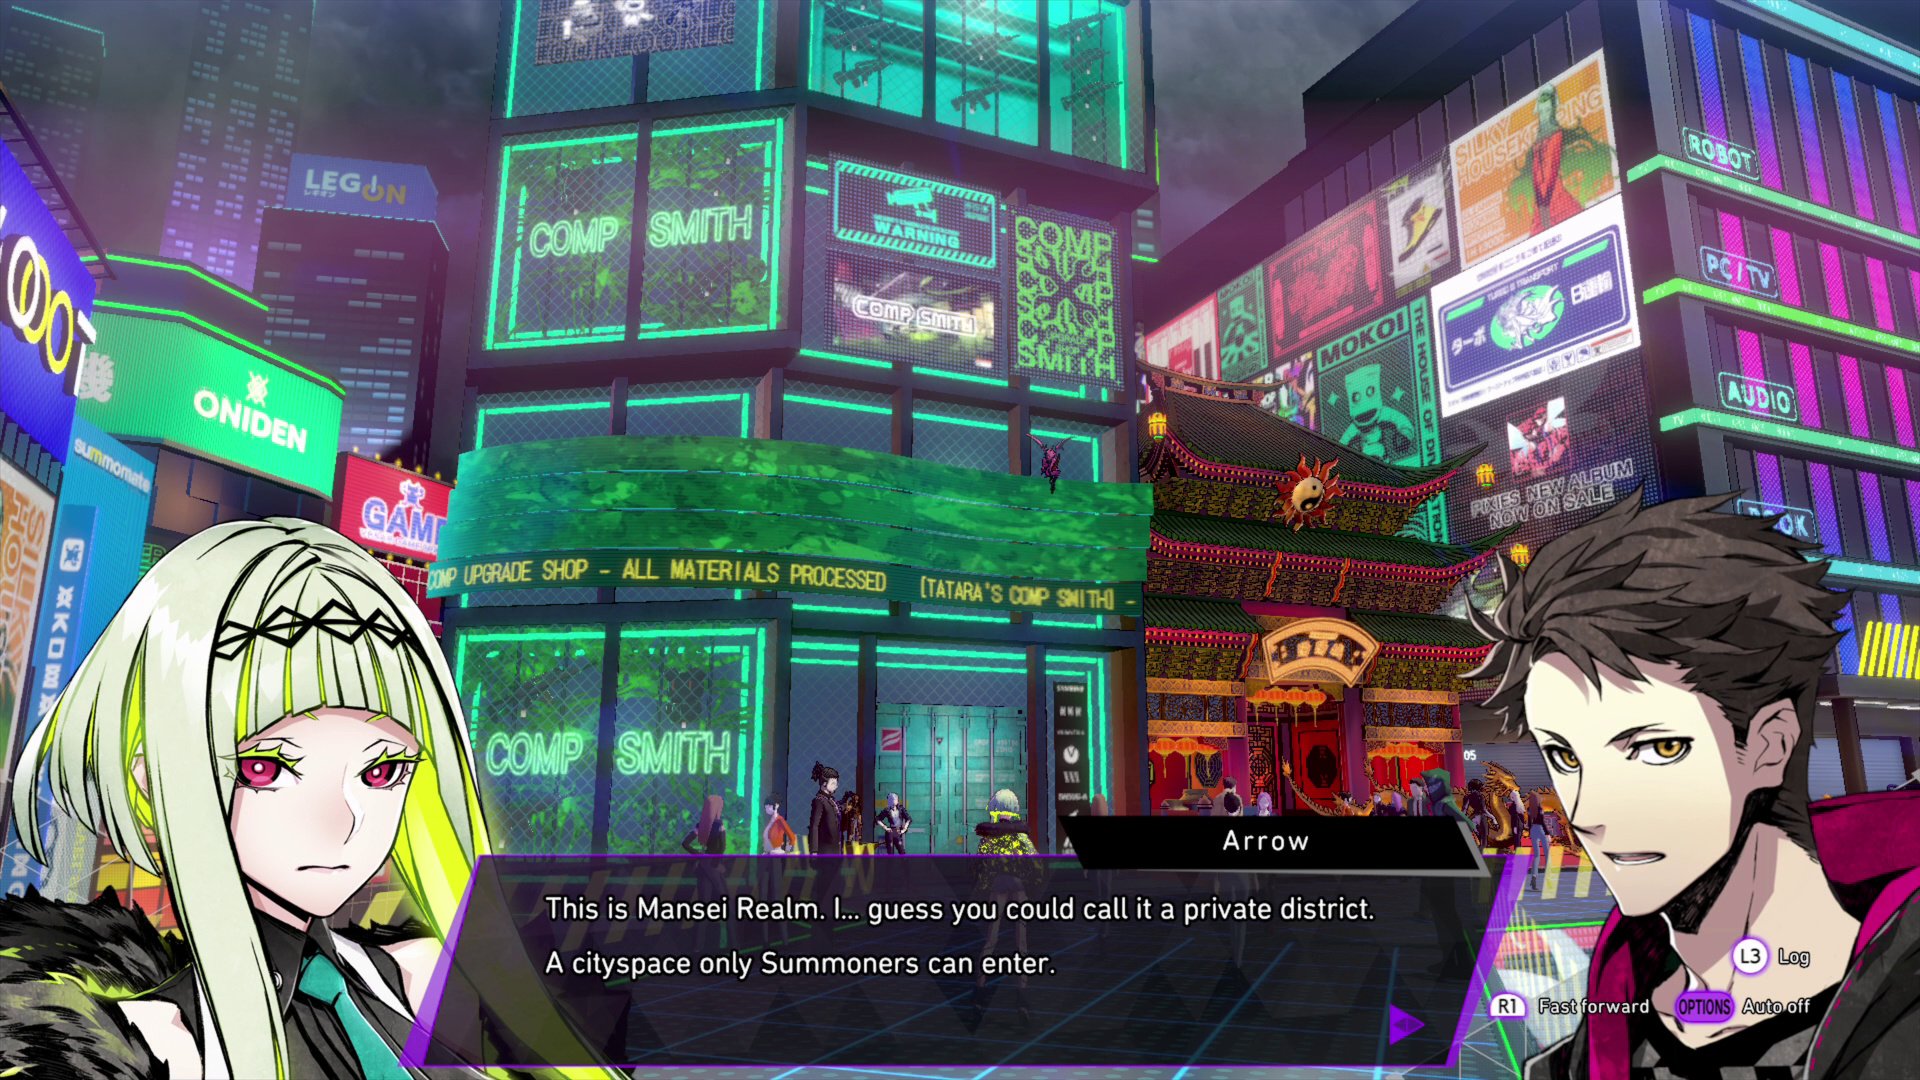 What Can Persona 5 Fans Expect From Soul Hackers 2?